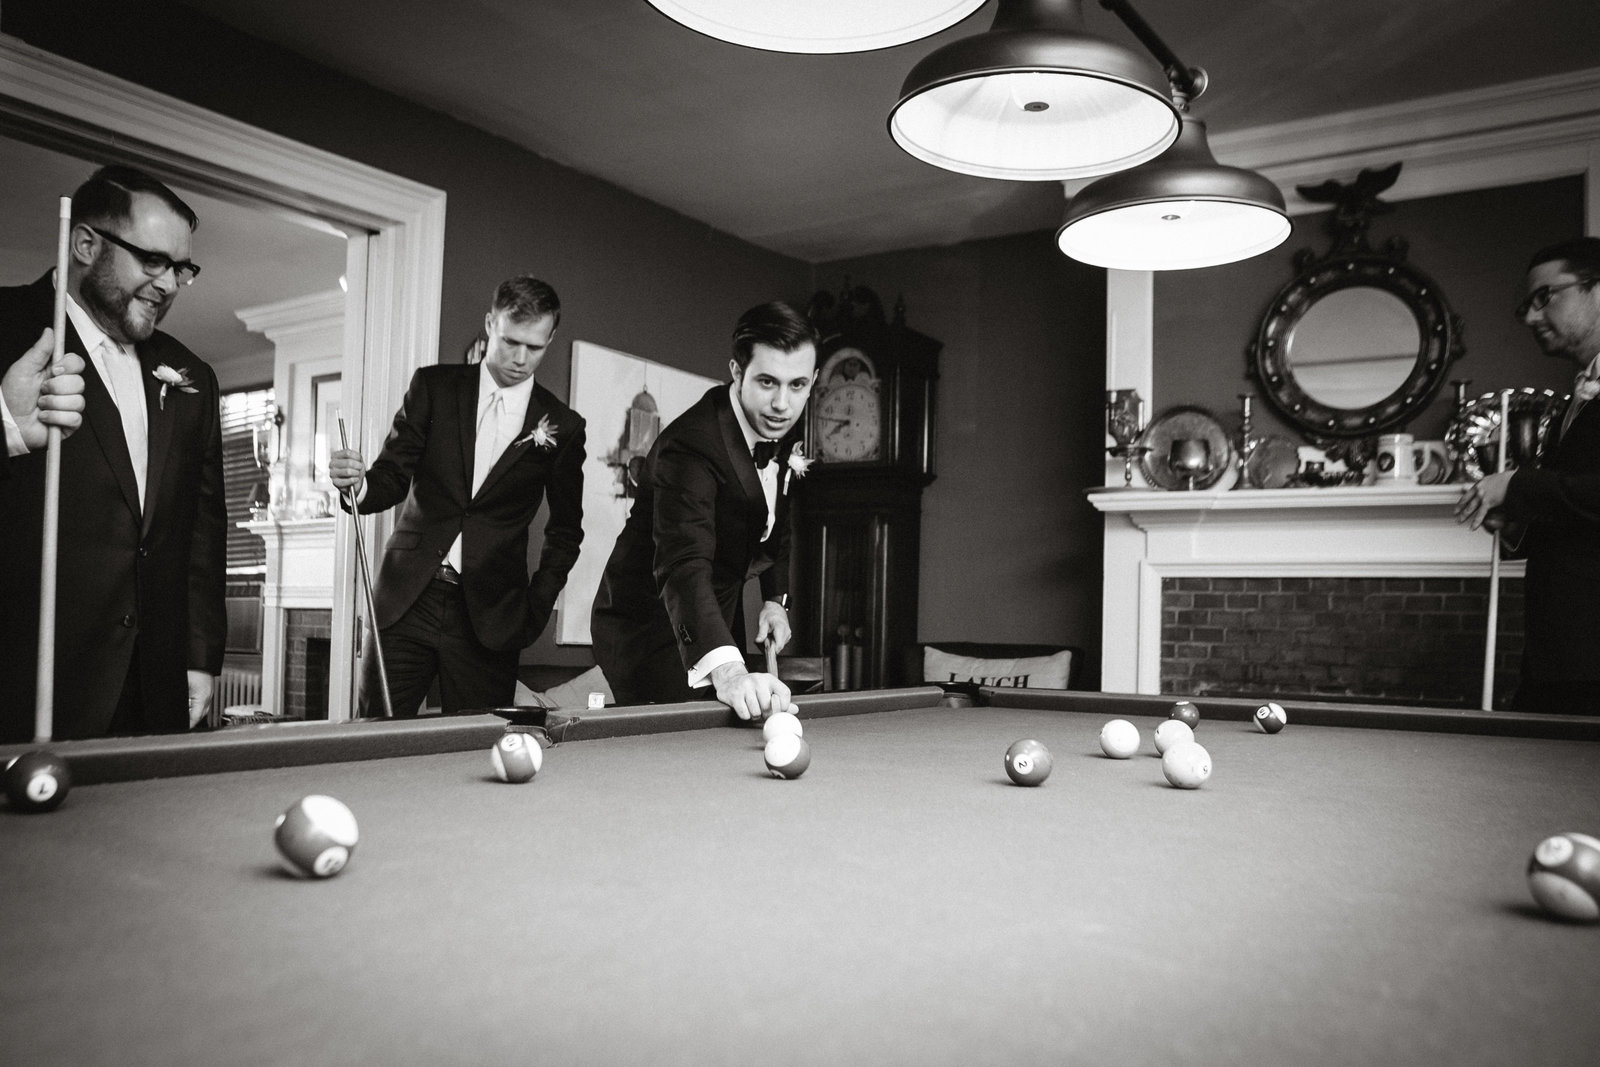 Groom and his groomsmen having a little fun and games before the big day.